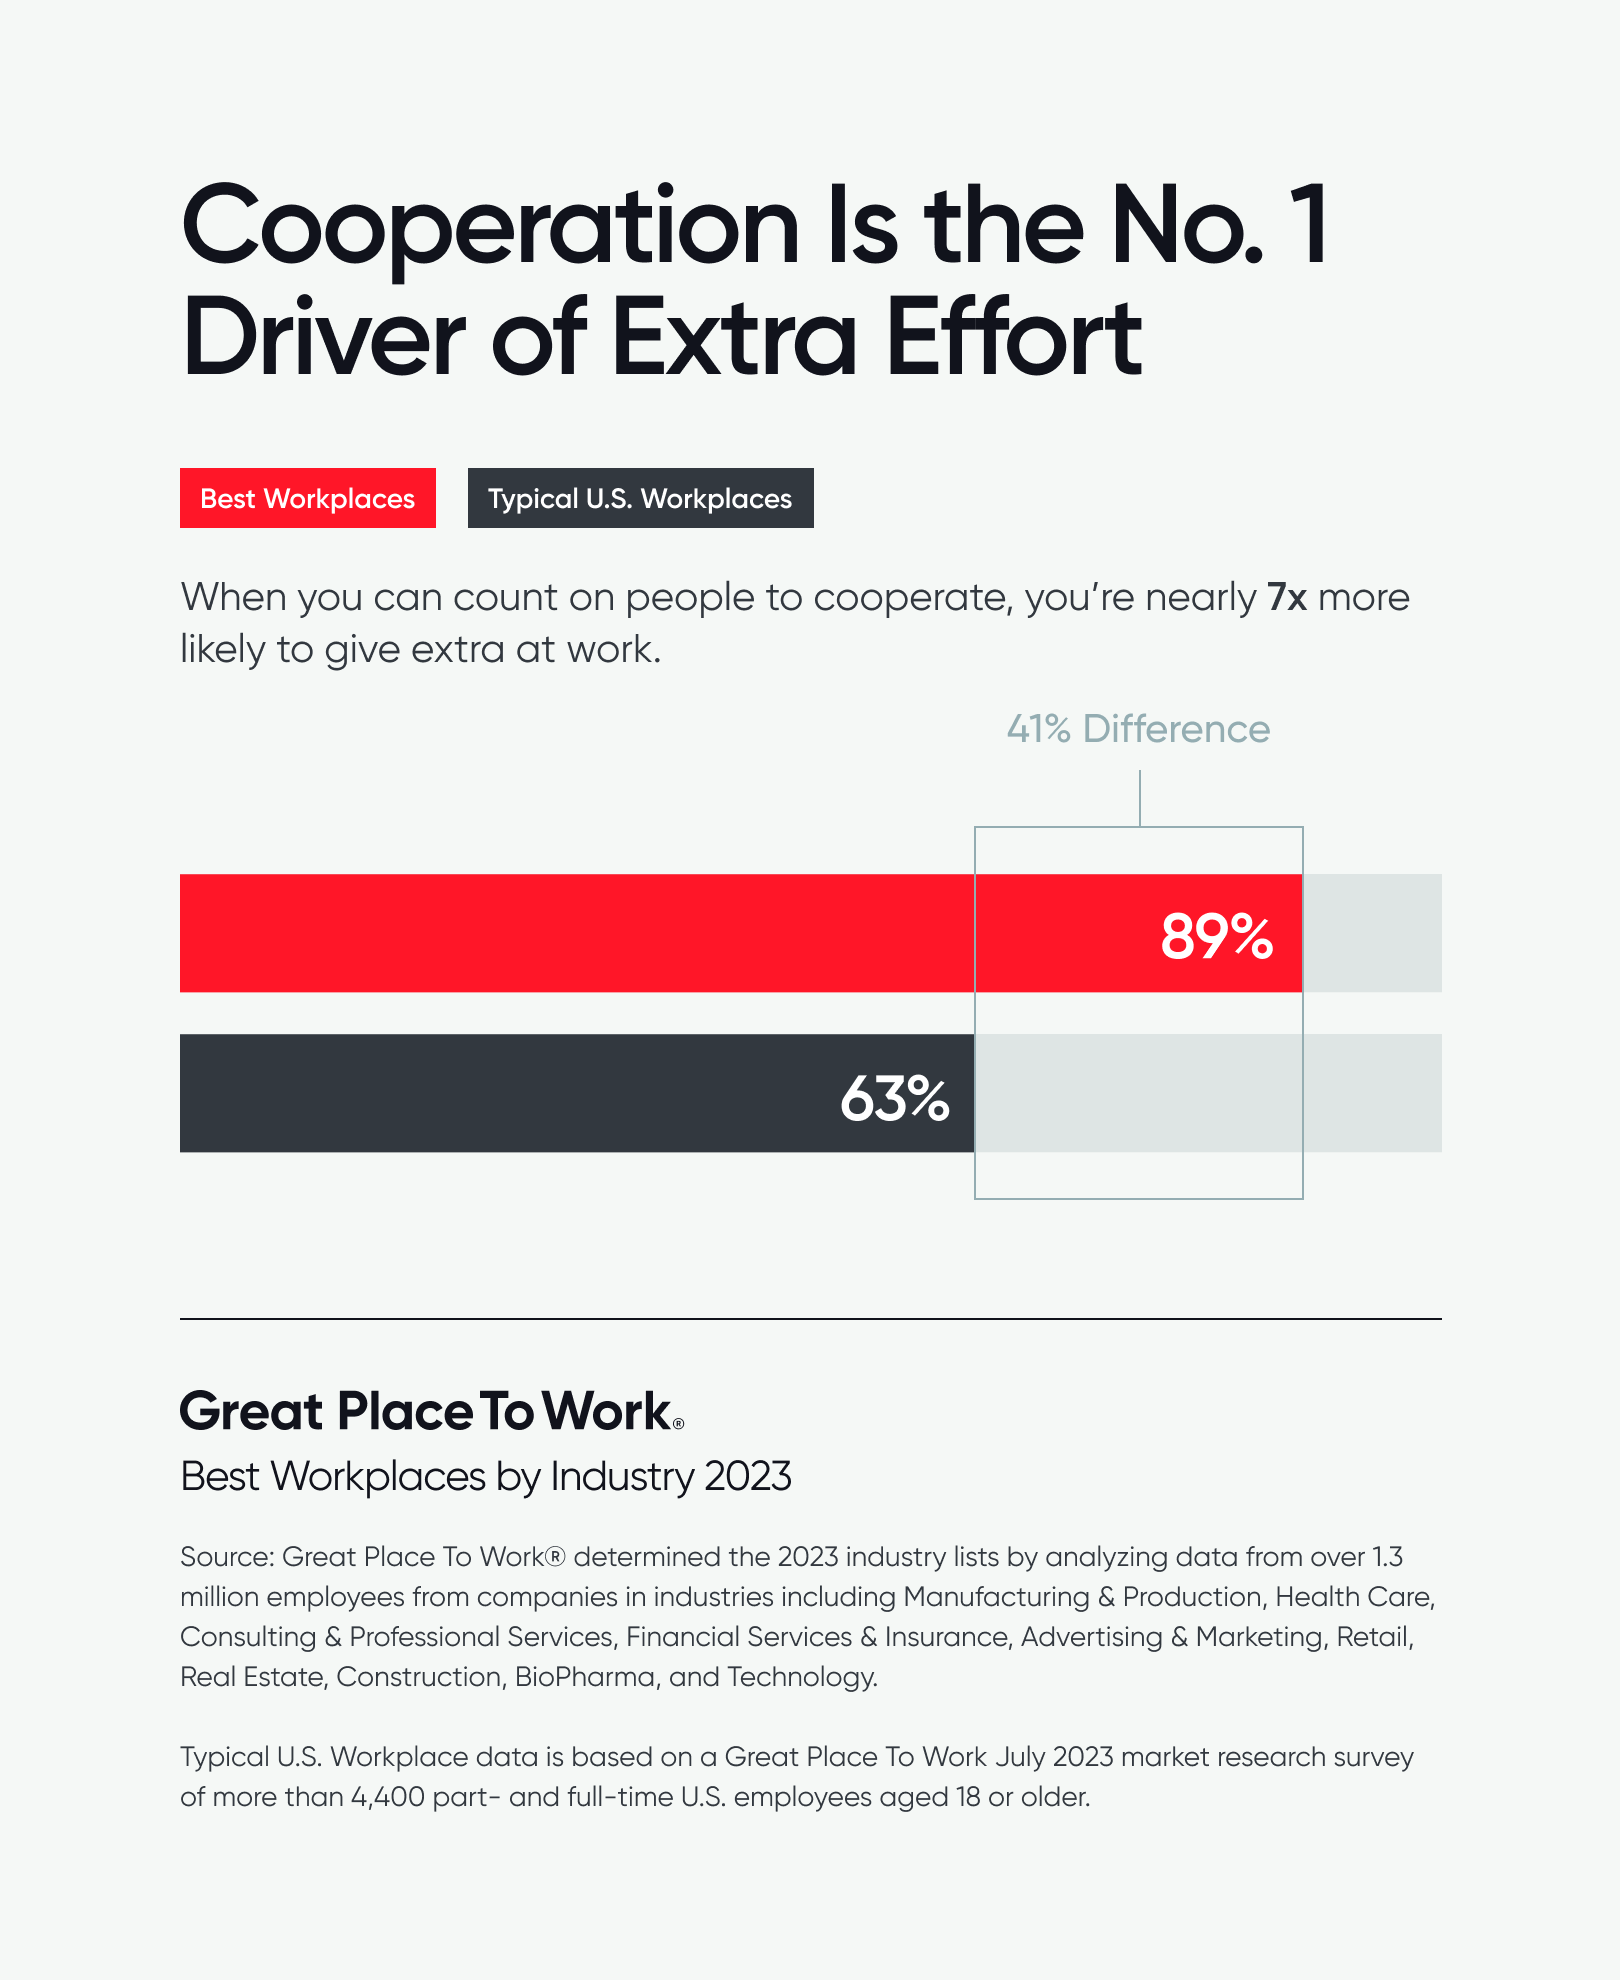 Cooperation Is the No. 1 Driver of Extra Effort